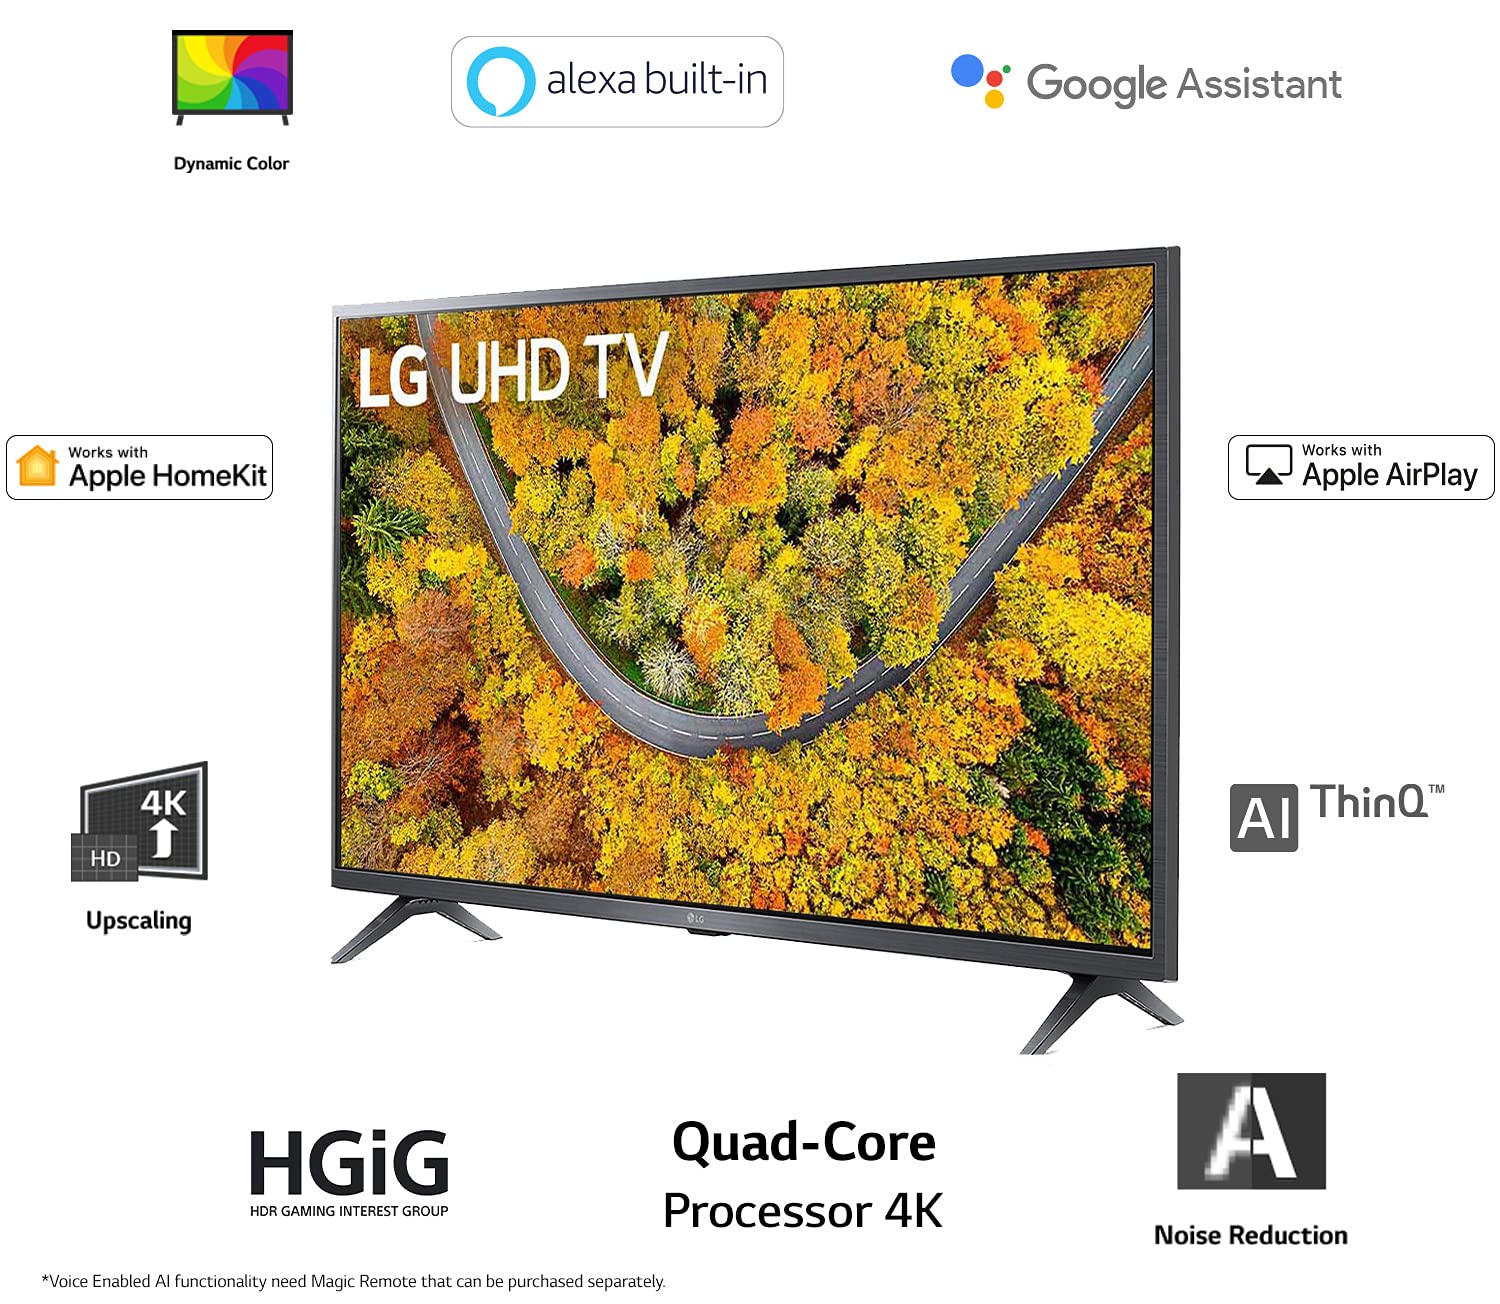 Amazon Festival Sale: This Diwali, save 30 thousand rupees on LG's big 55-inch smart TV, just 3 days left for the sale to end